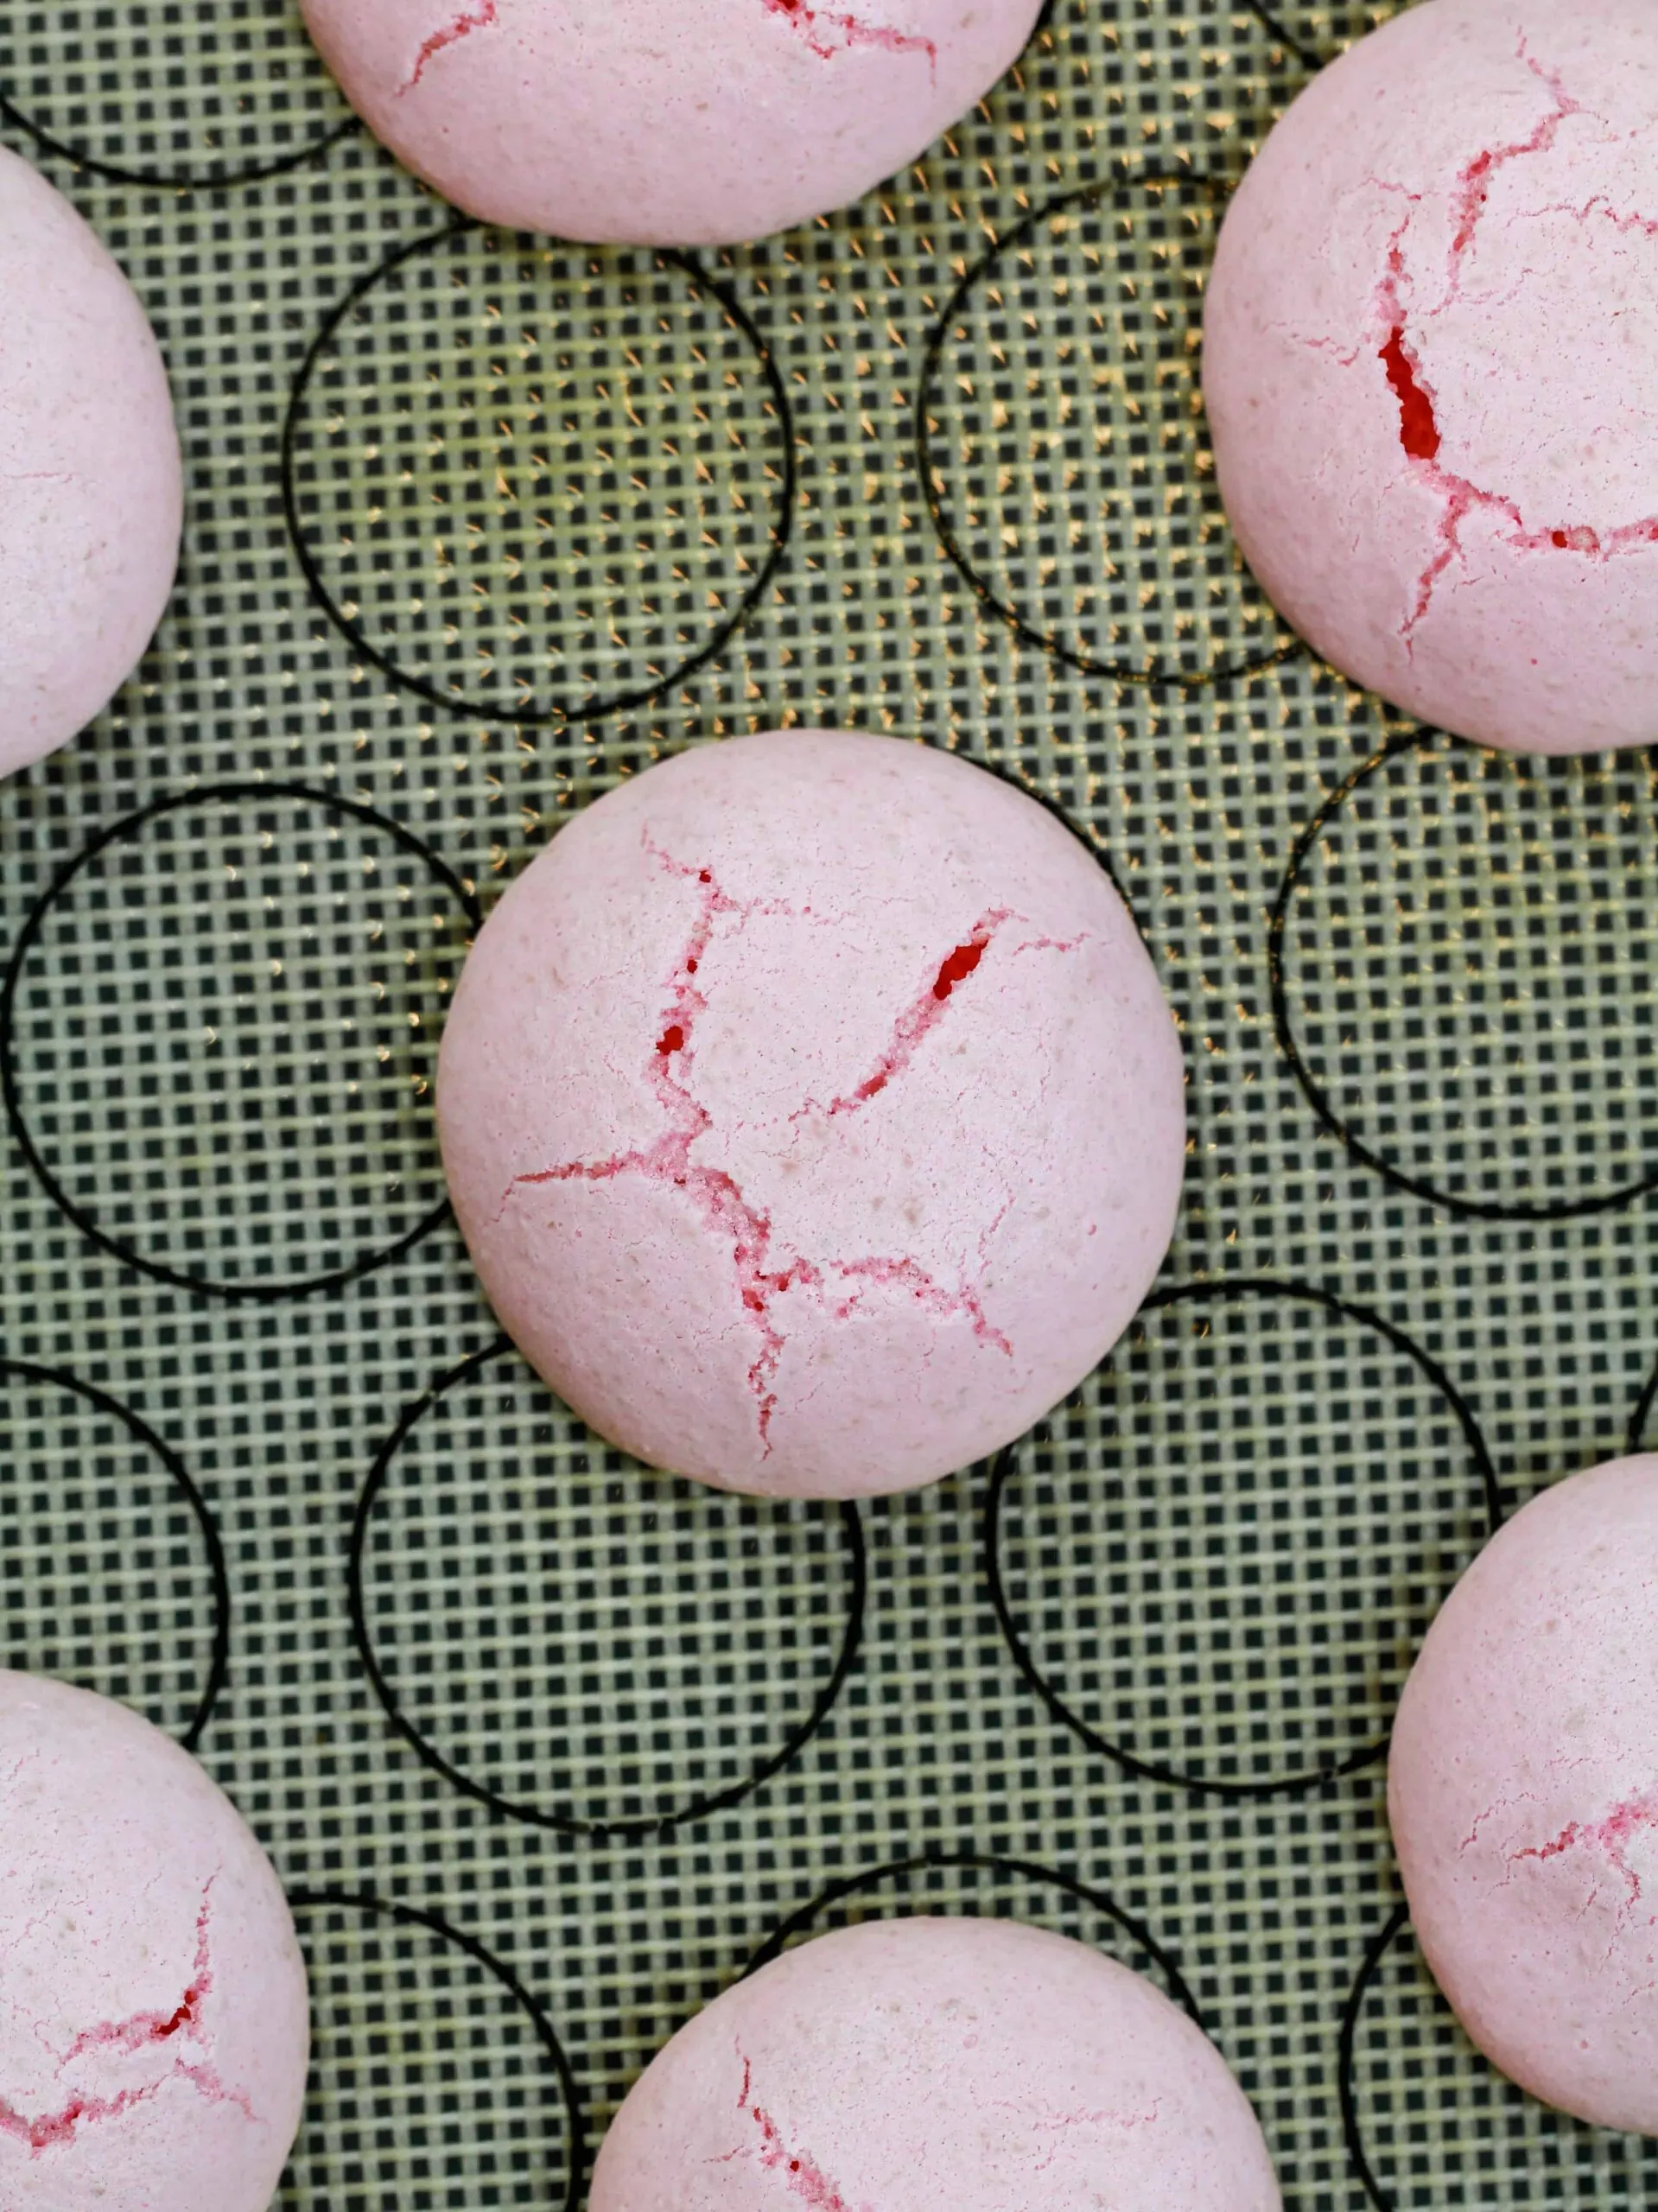 image of cracked italian macarons that were baked in too hot of an oven